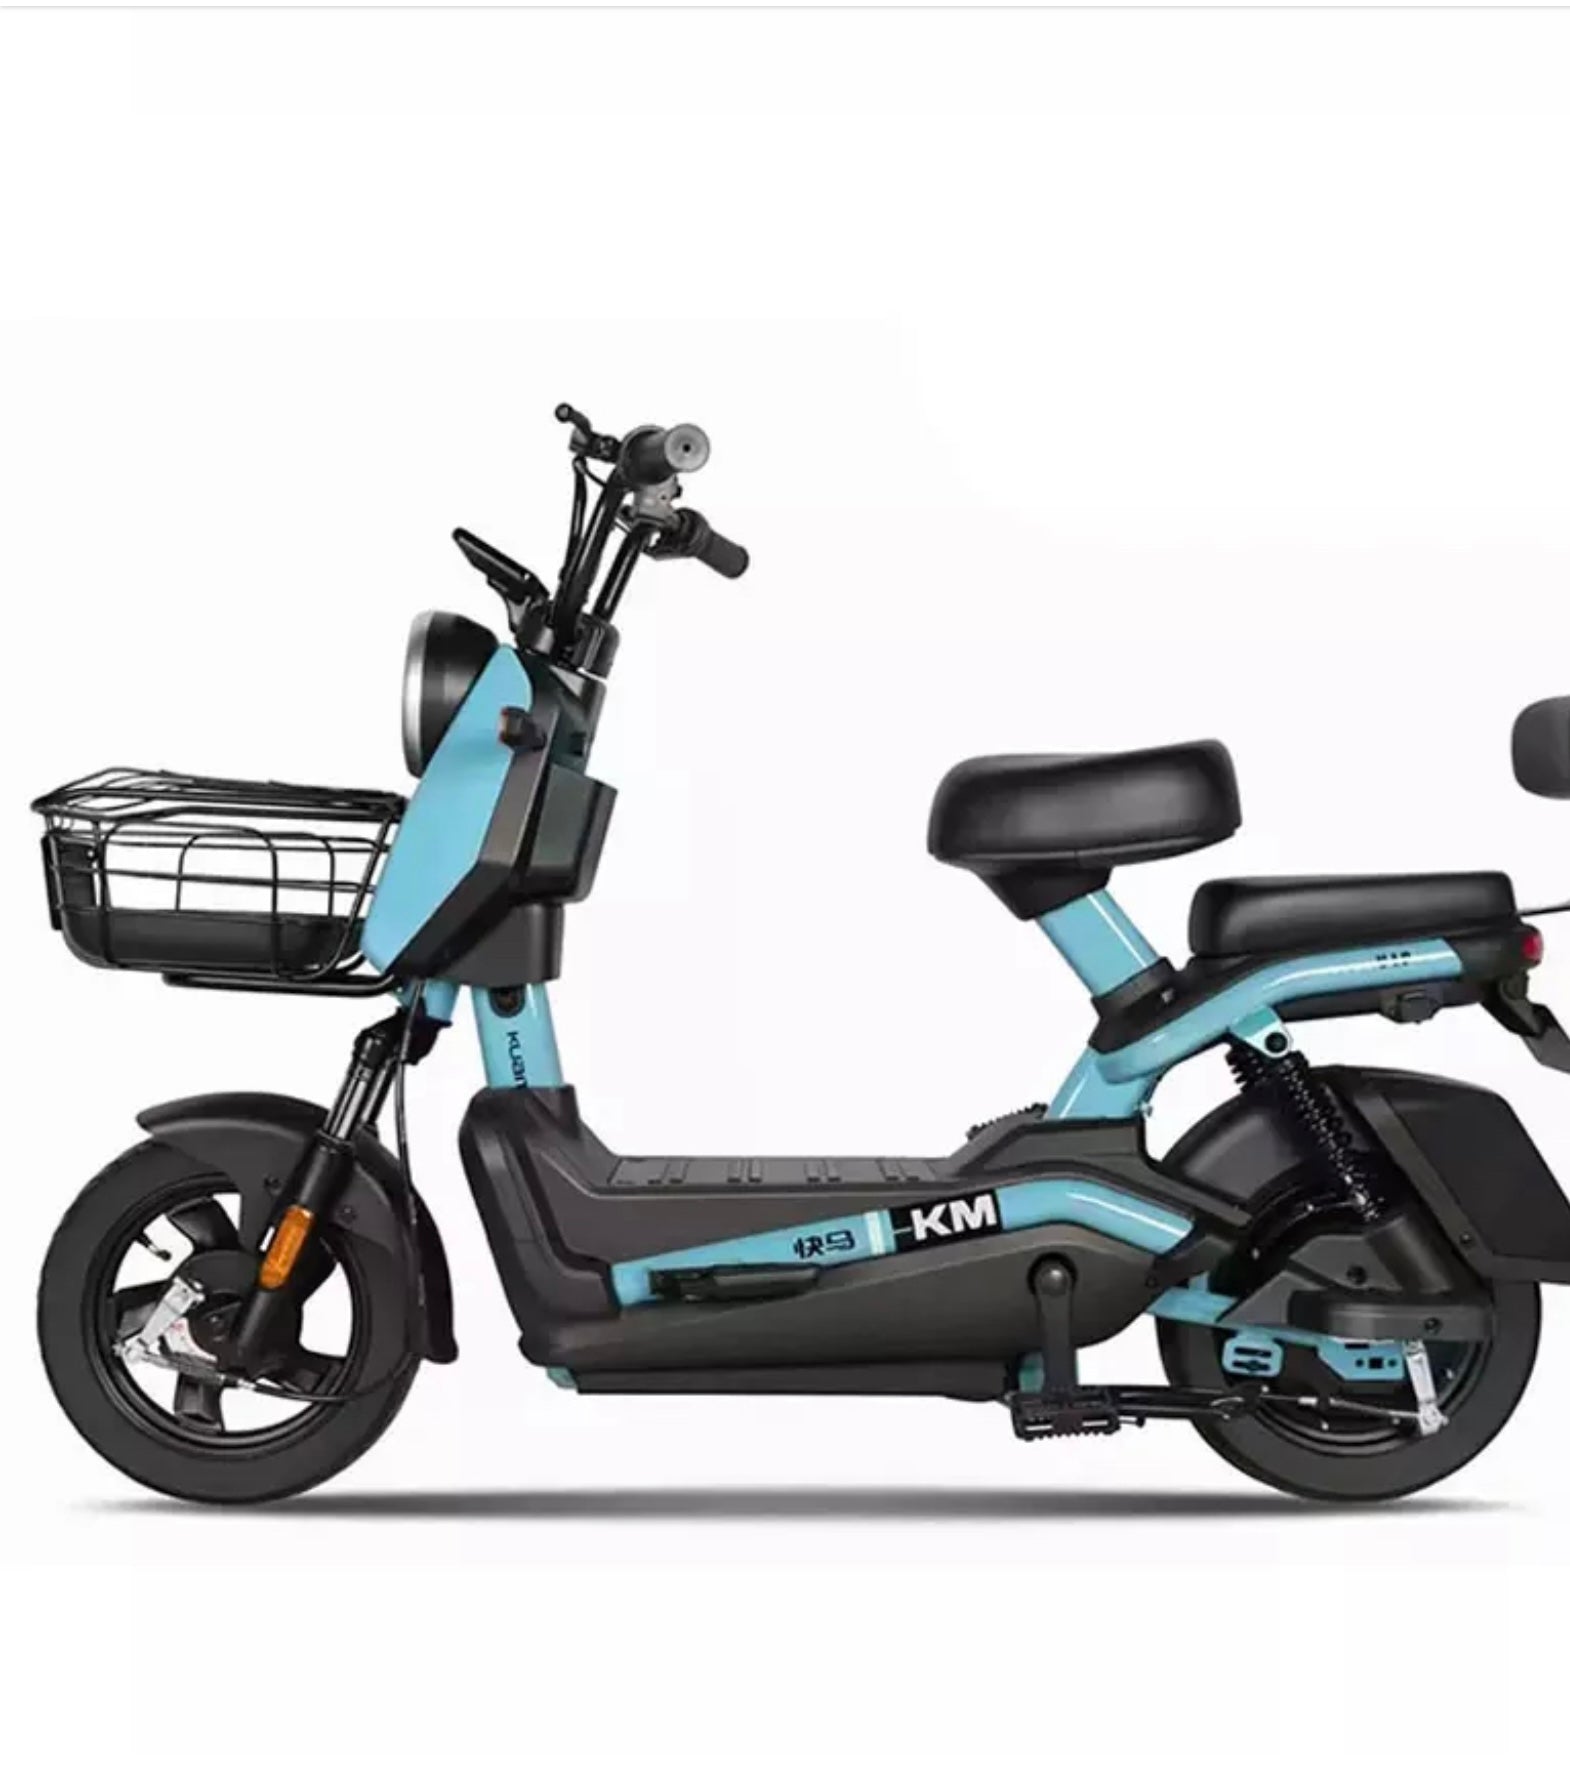 Avenger 3-Speed Electric Scooter 18MPH, Range 30 Miles- 2 Seated Scooter Home Gym Equipment